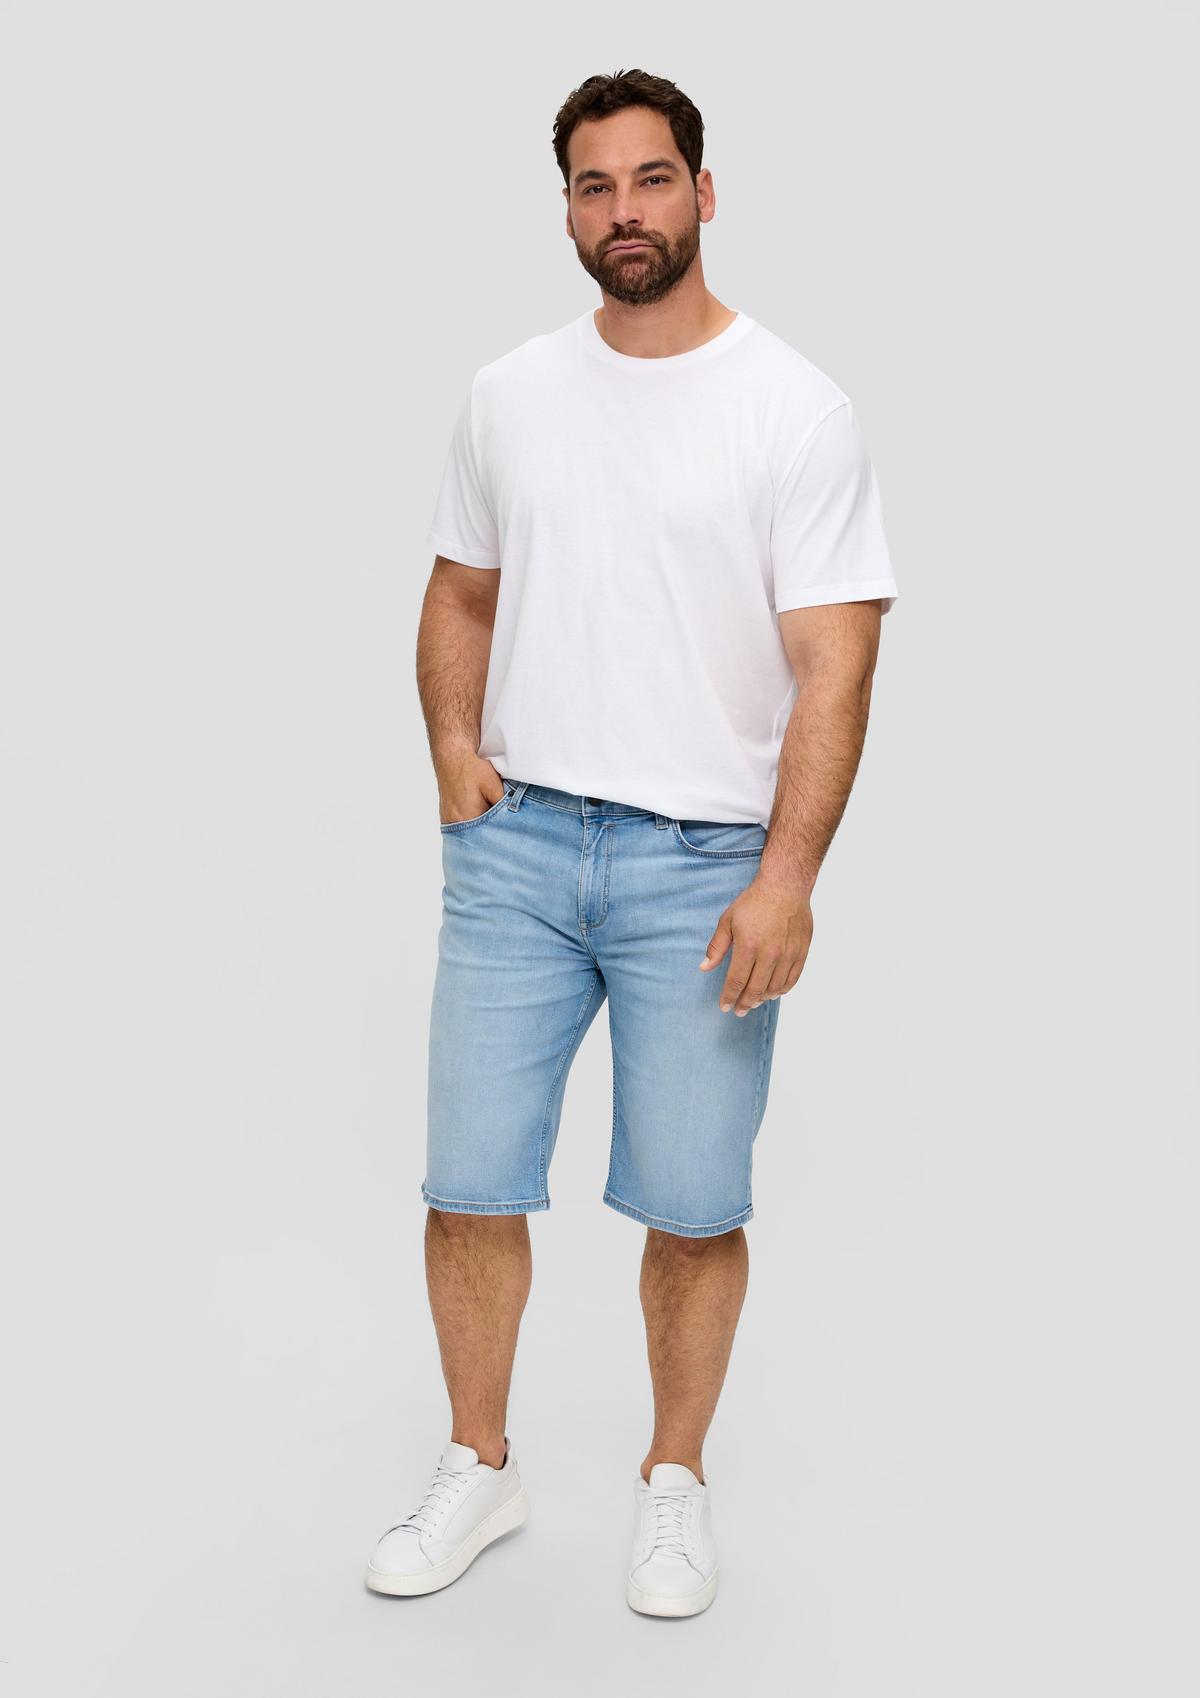 Jeans-Short Casby / Mid Rise / Five Pocket Style